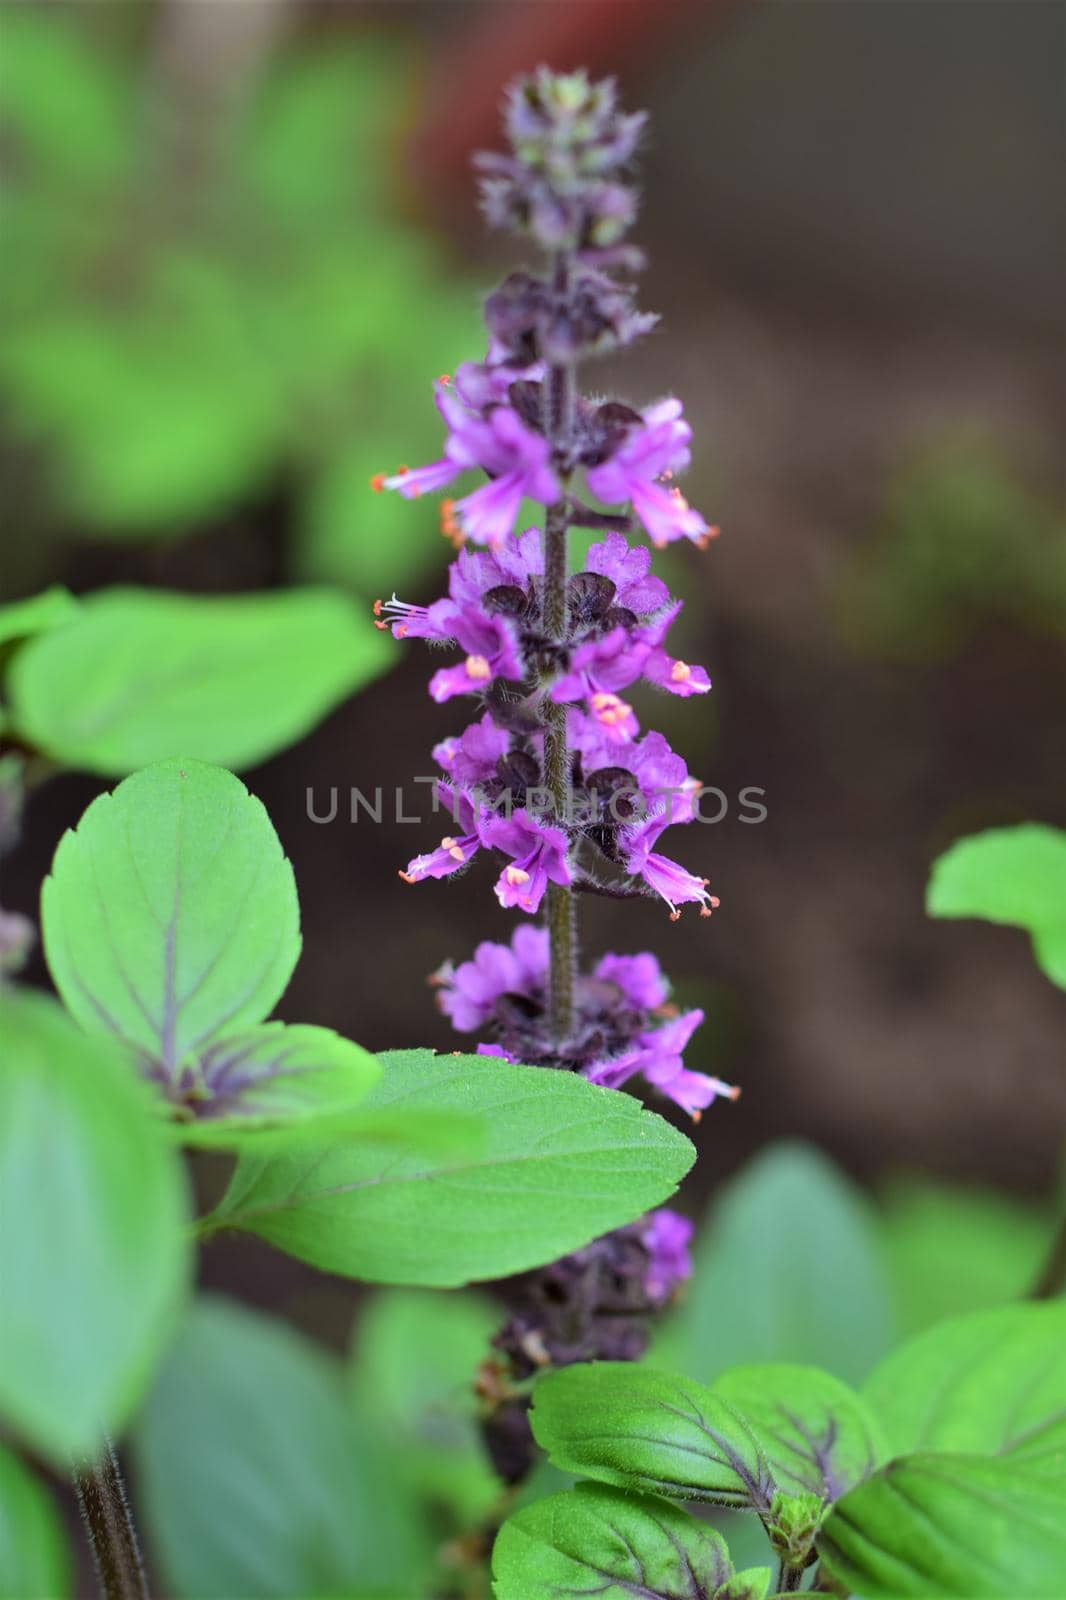 Close up of a flowering shrub basil against a blurred background by Luise123